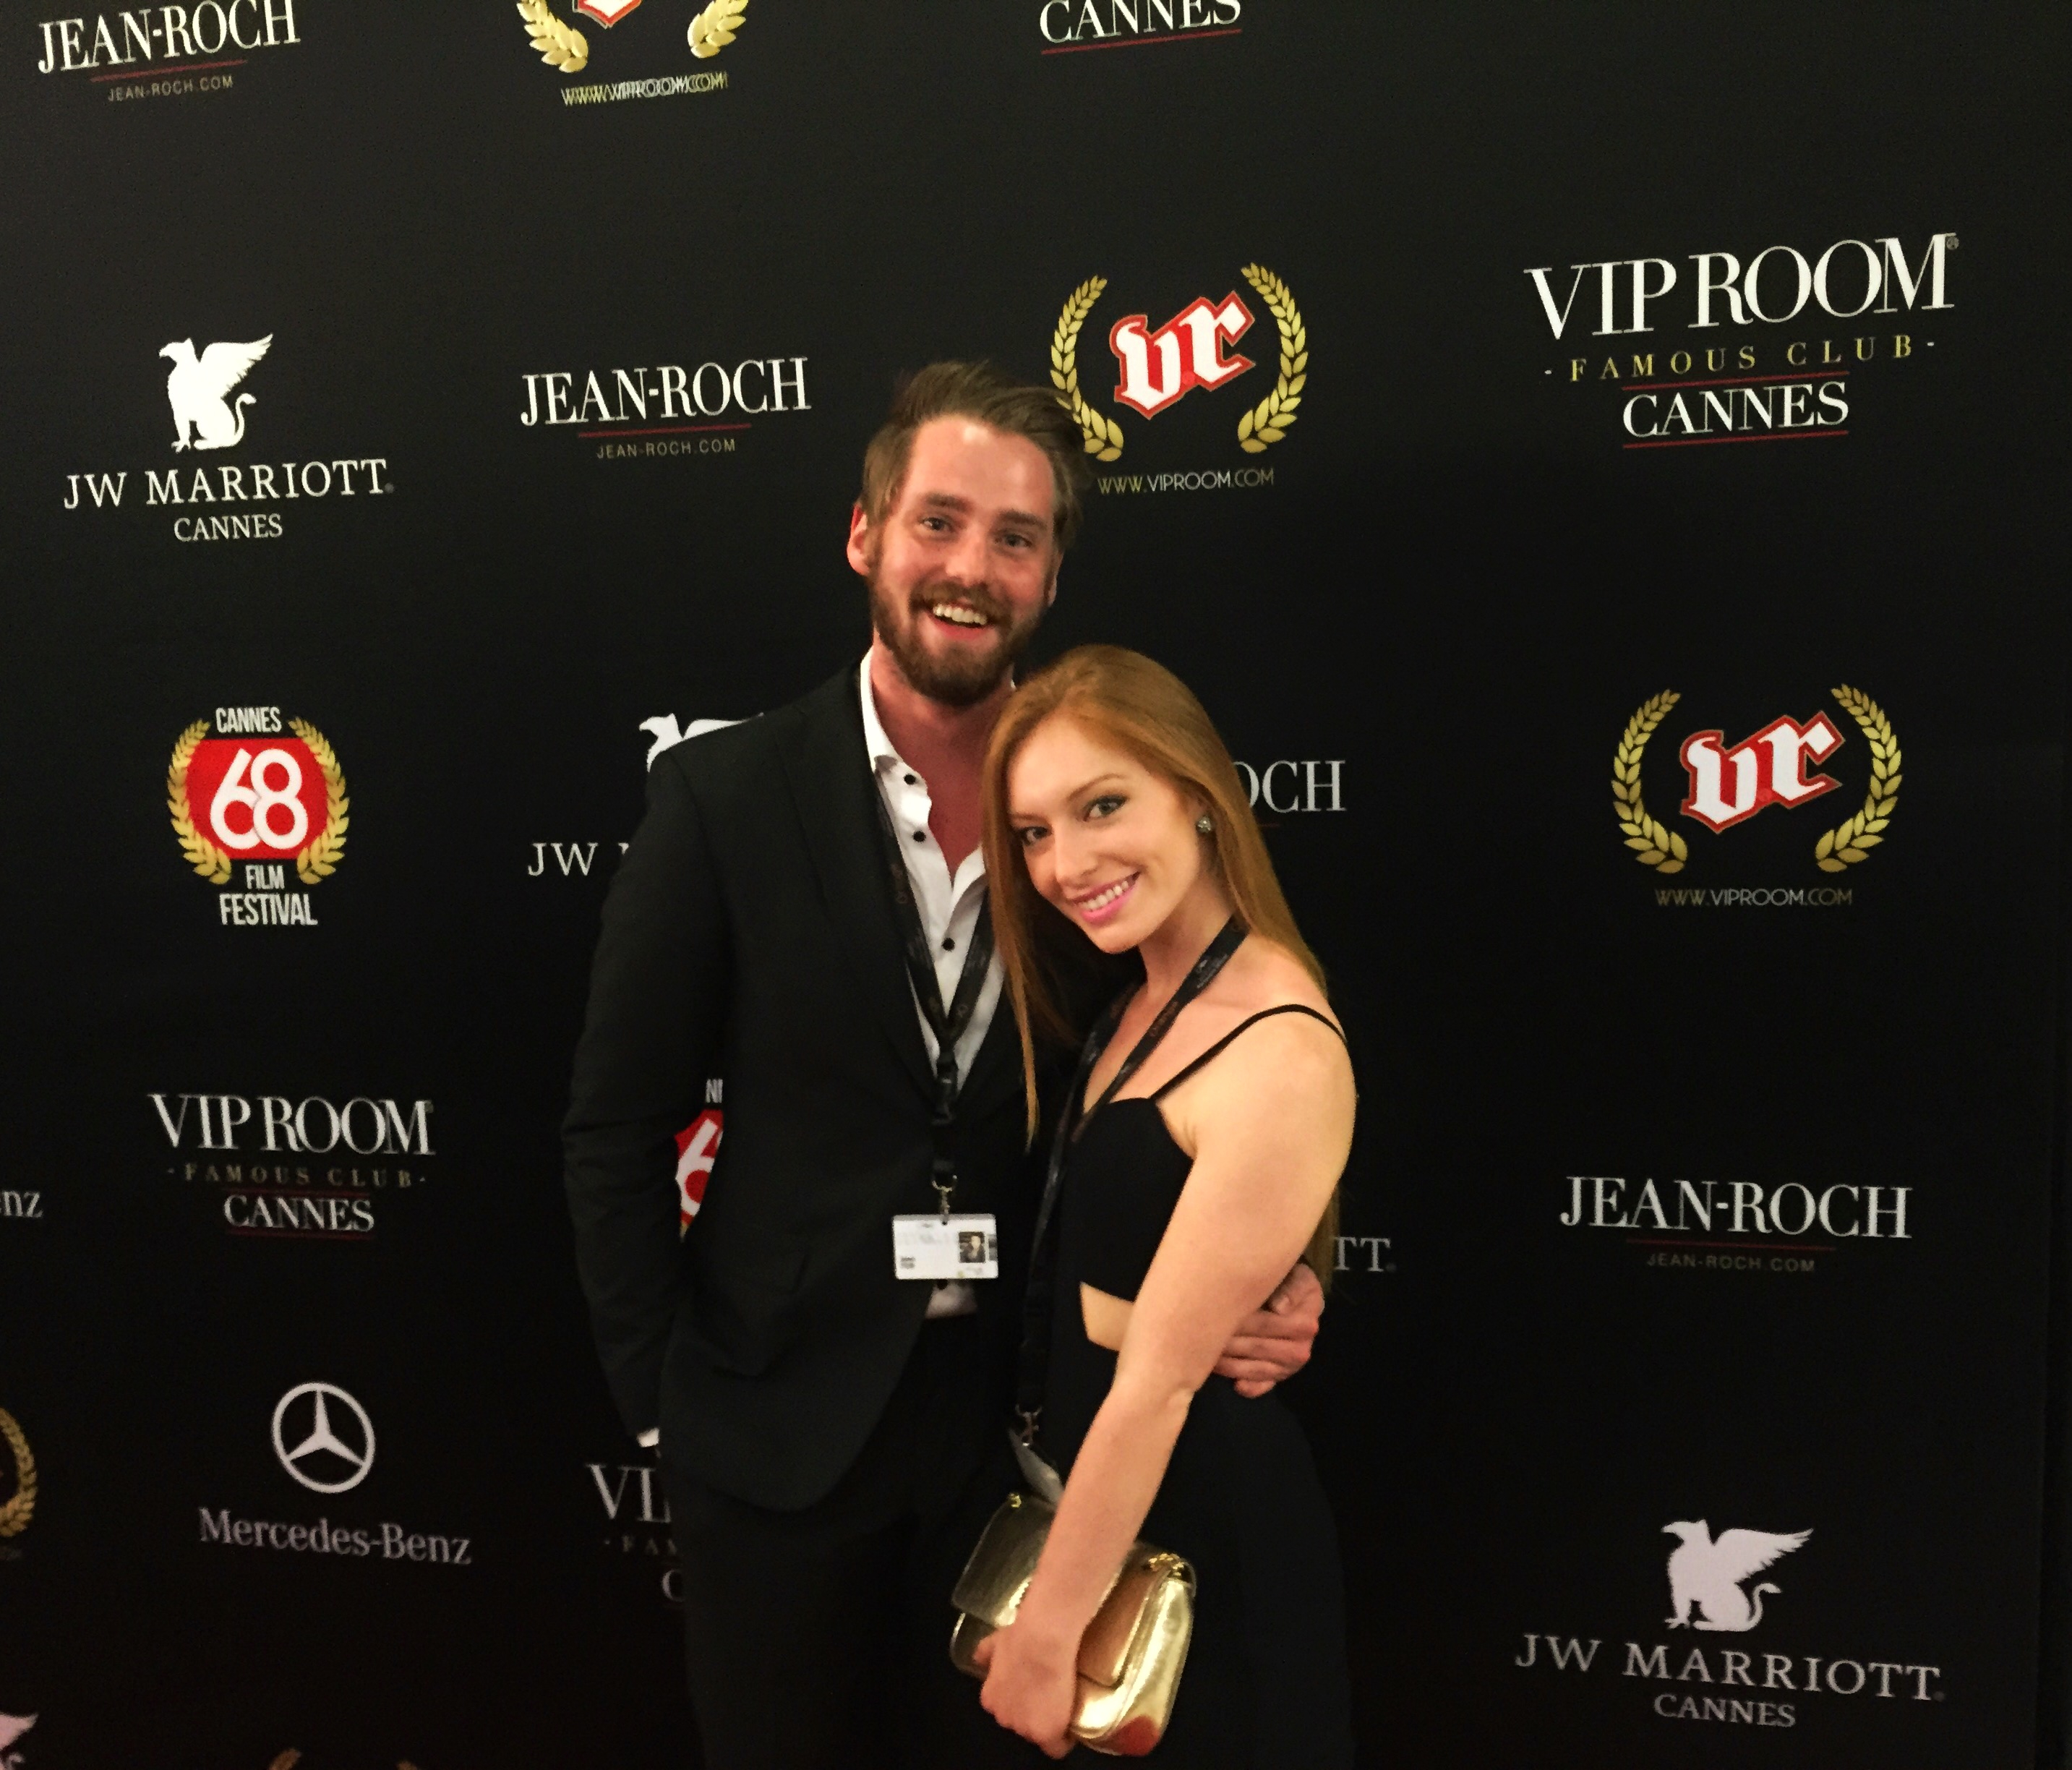 James Tyler and Mallory Snow at Festival de Cannes 2015.